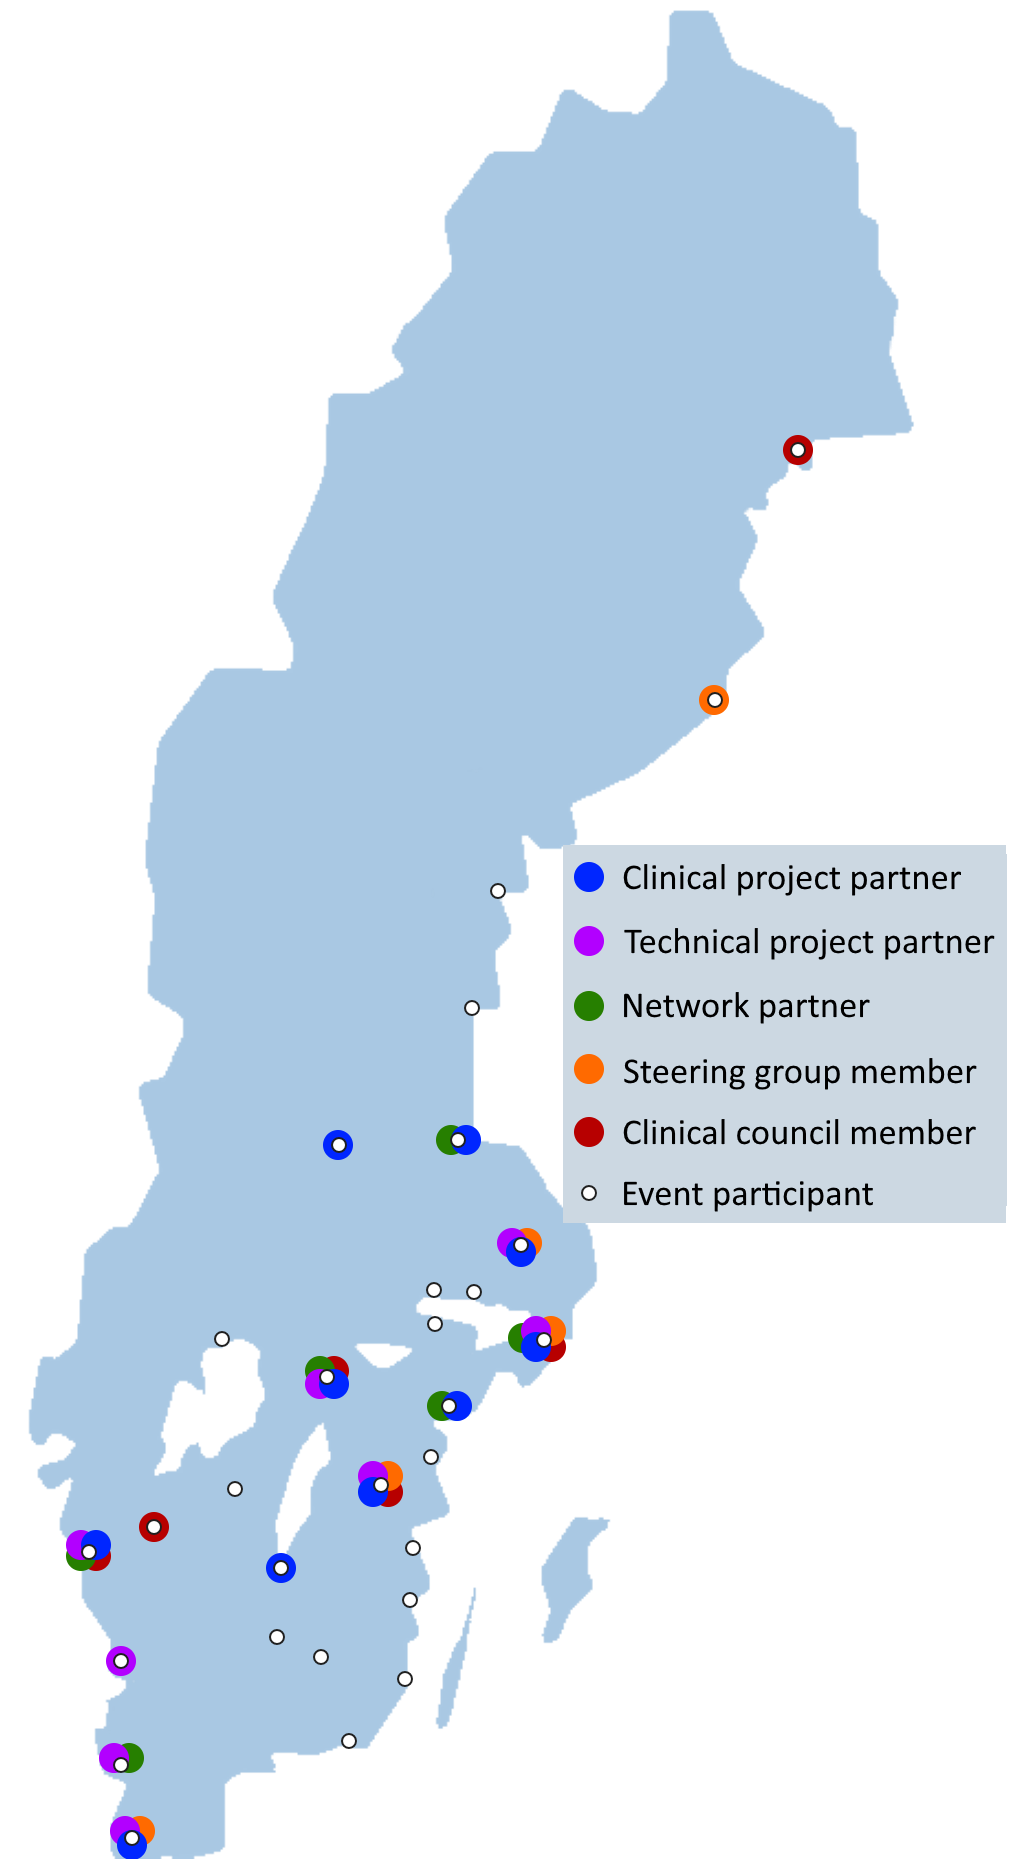 Distribution of AIDA partners in Sweden